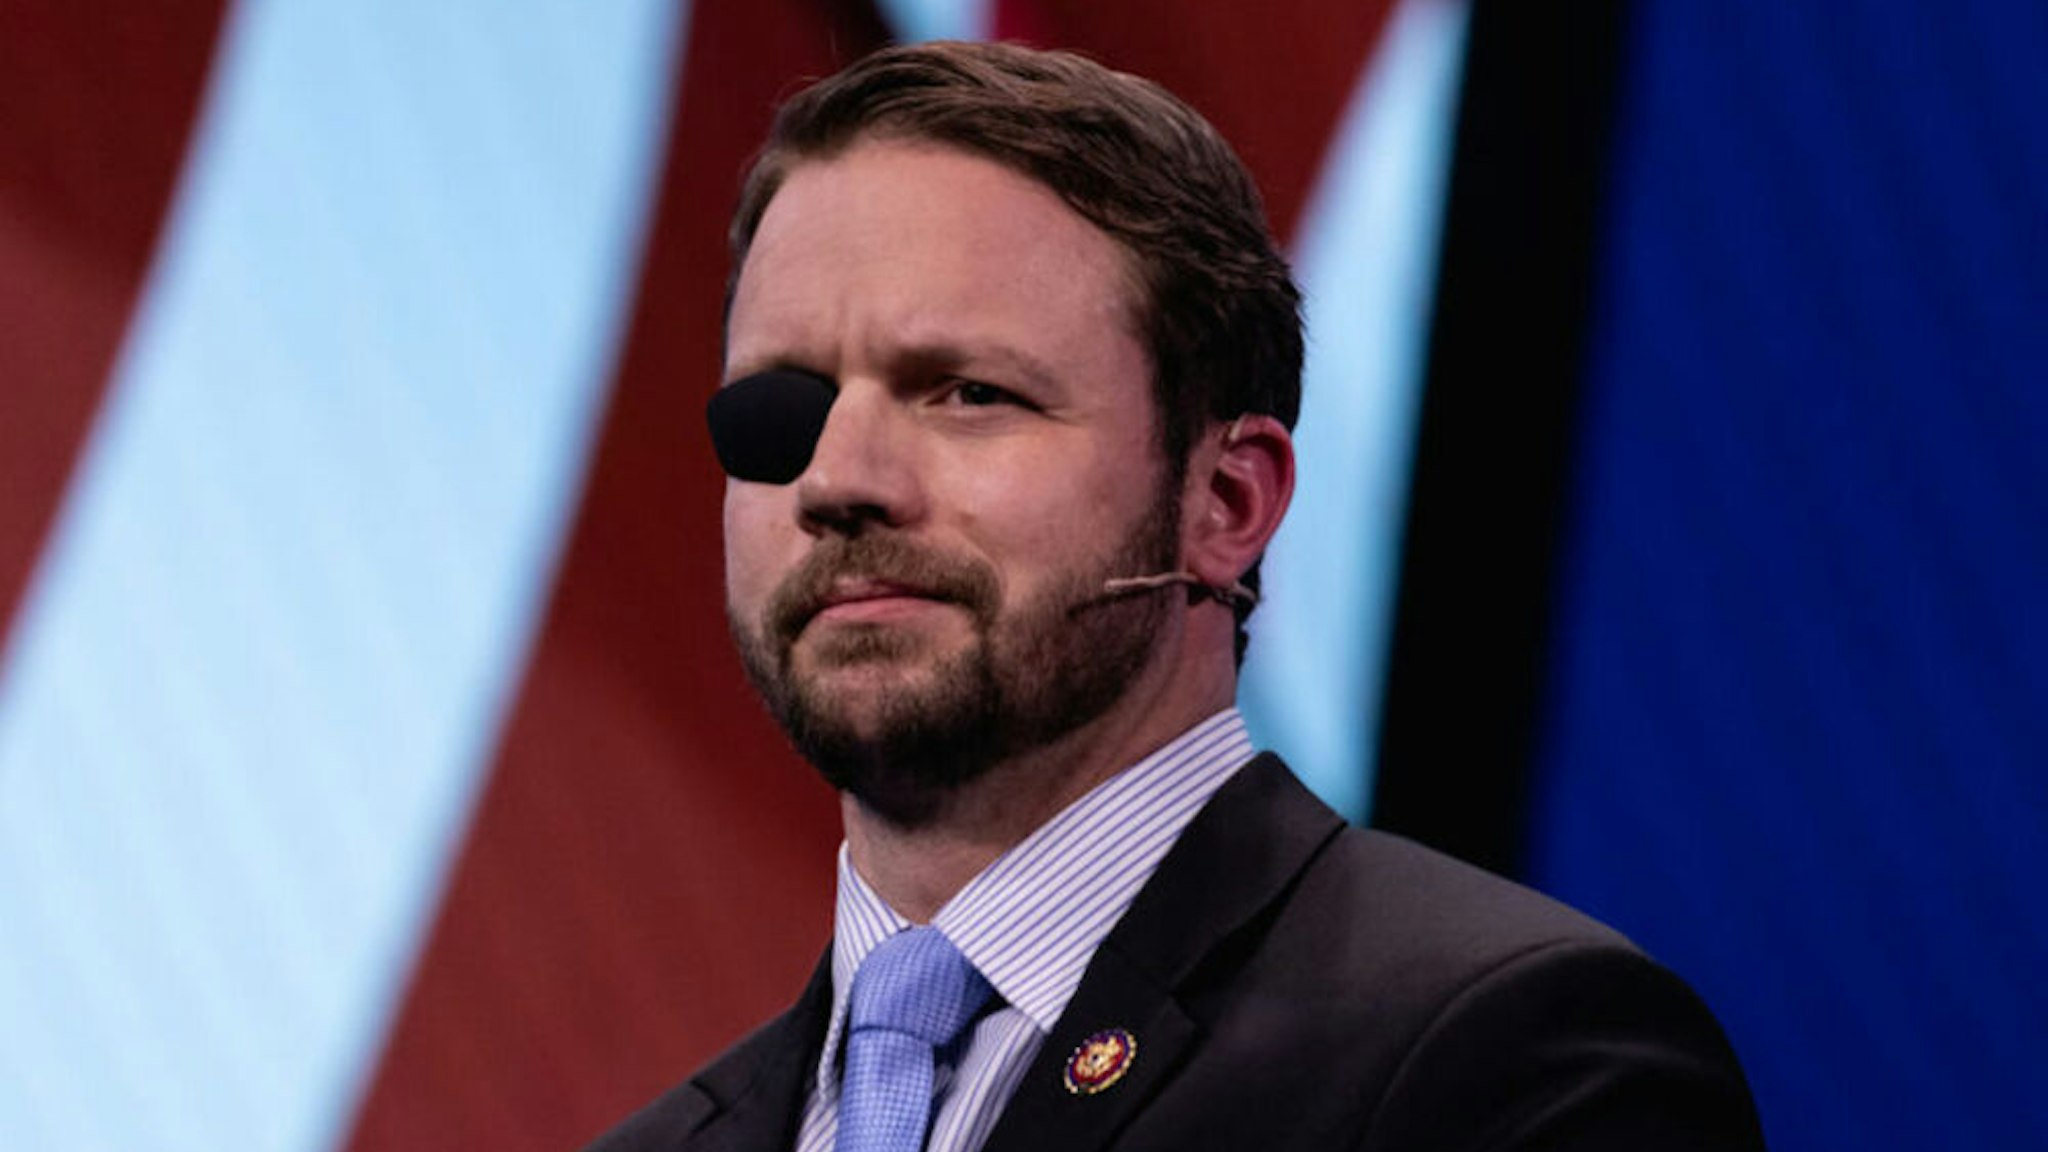 Rep. Dan Crenshaw (R-TX), speaks at the 2019 American Israel Public Affairs Committee (AIPAC) Policy Conference, at the Walter E. Washington Convention Center in Washington, D.C., on Monday, March 25, 2019